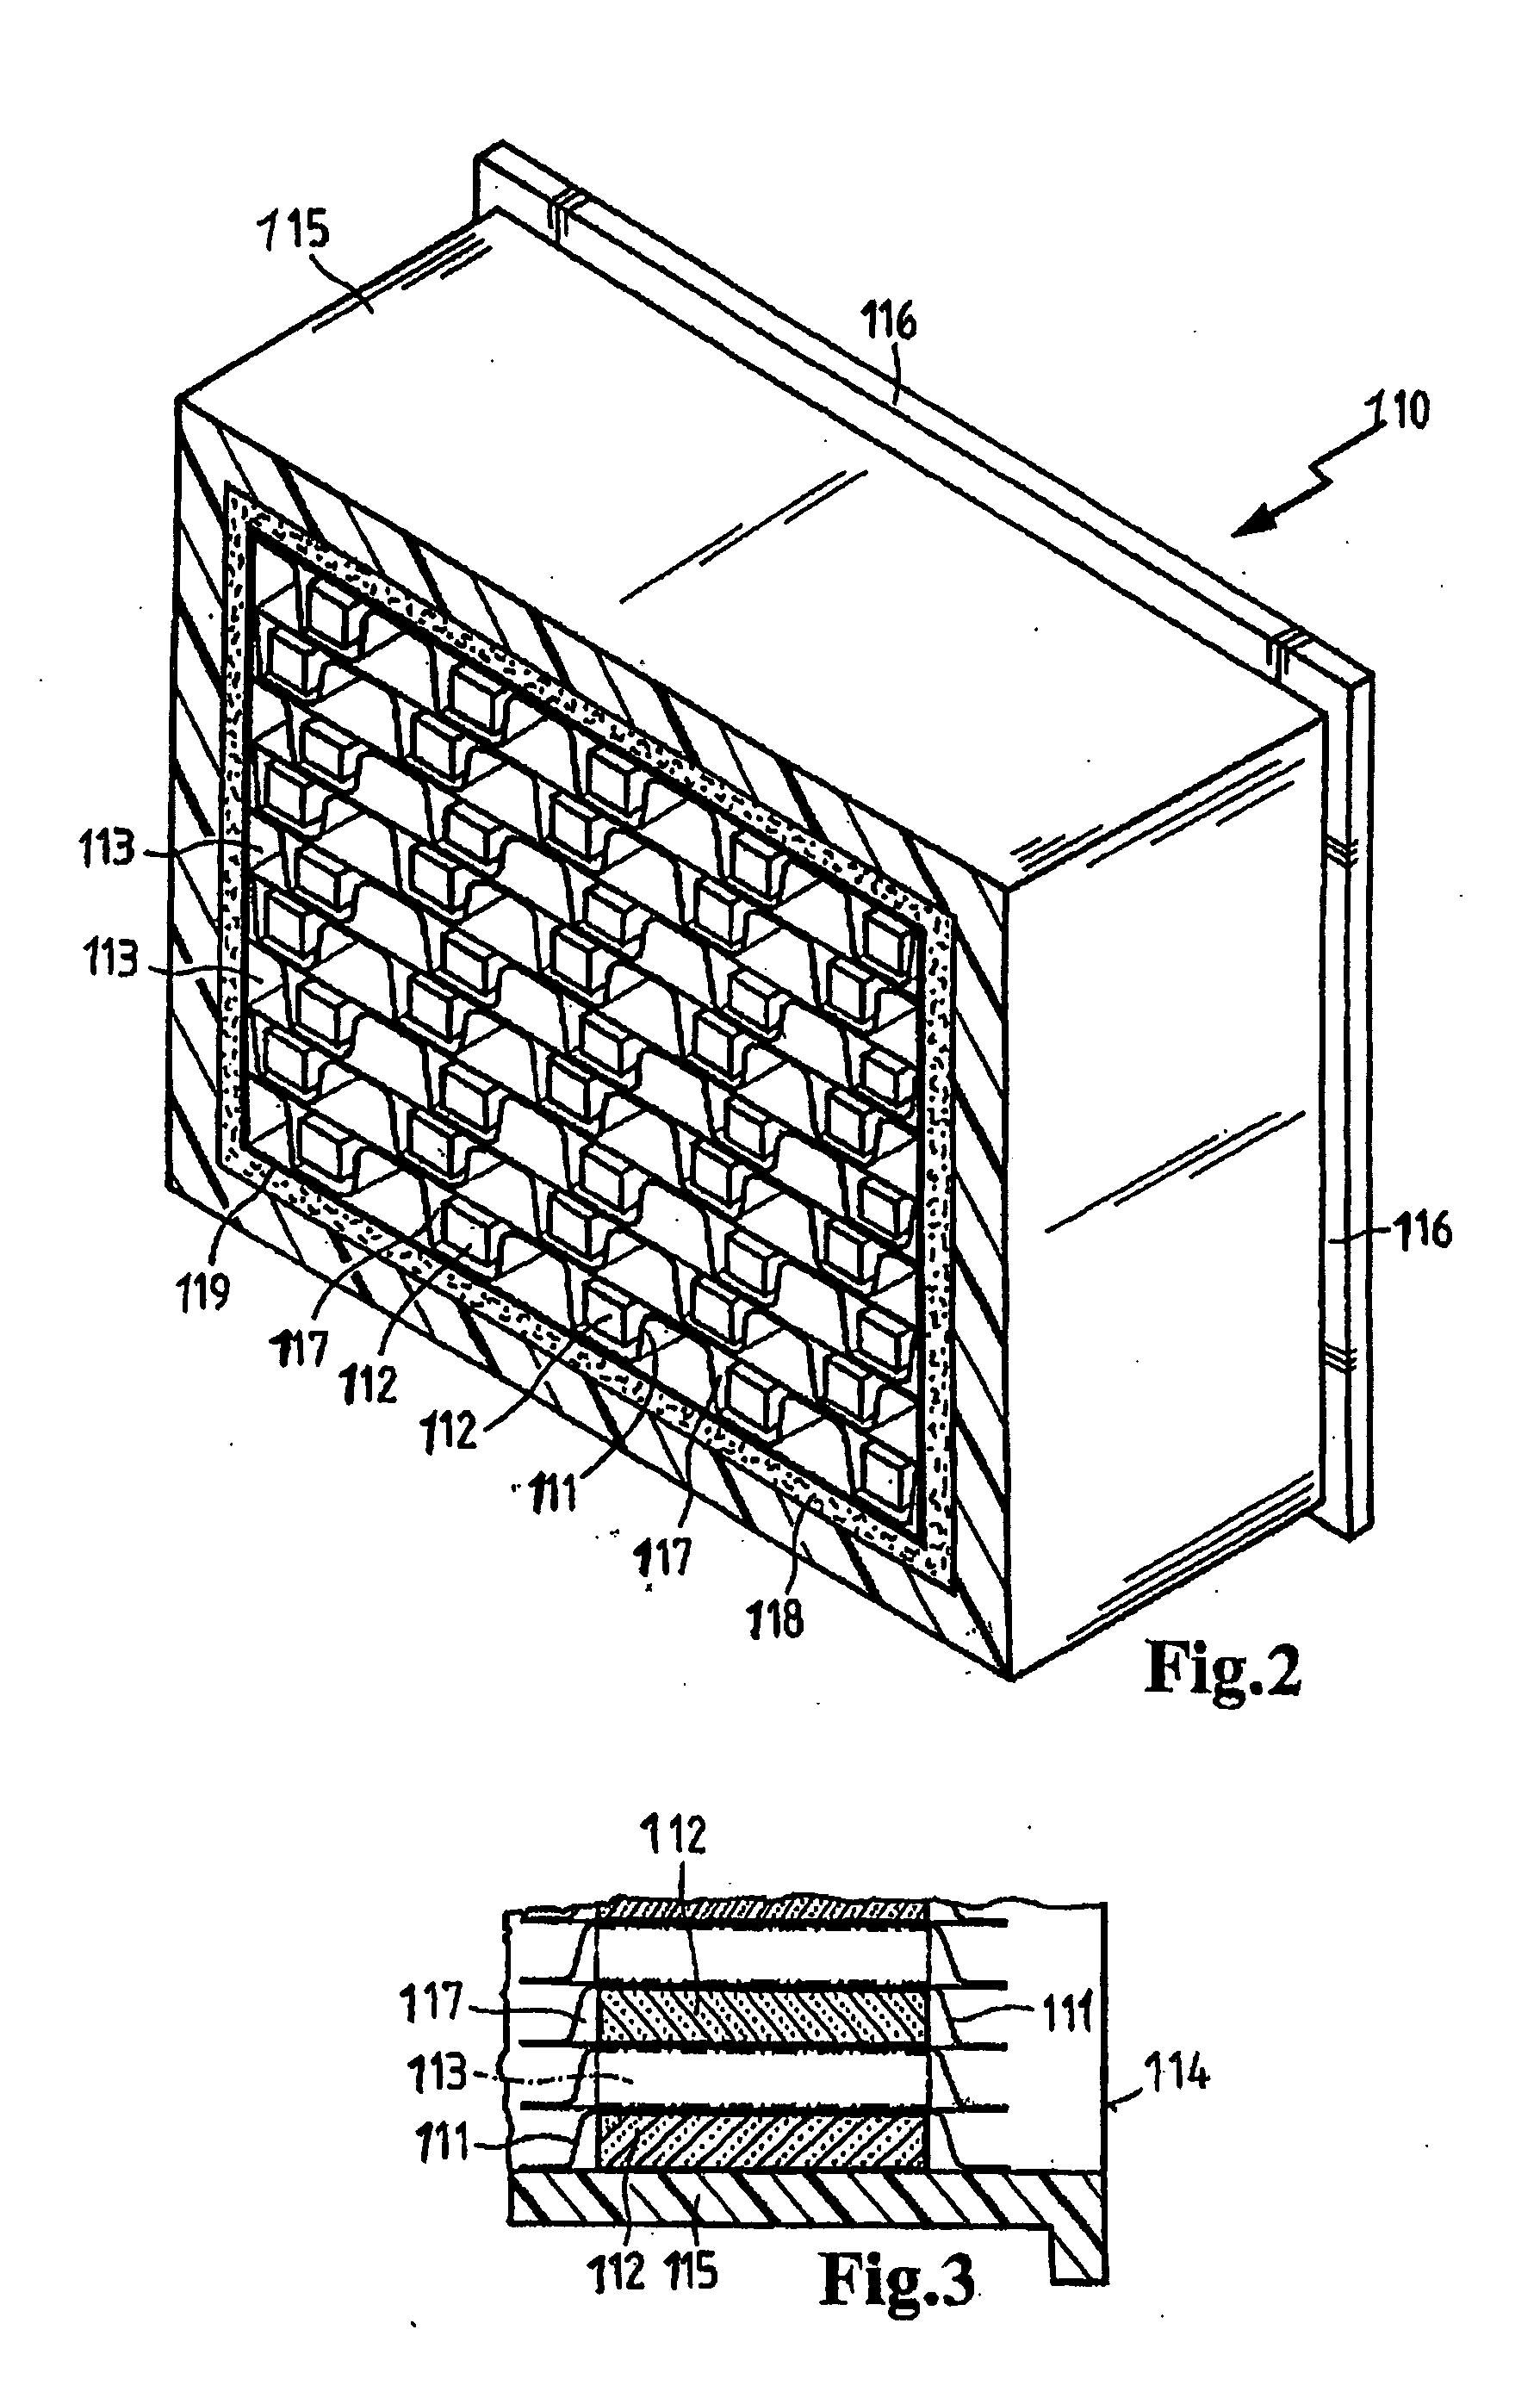 Adsorber for adsorbing hydrocarbon vapors from return flows through an intake tract of an internal combustion engine